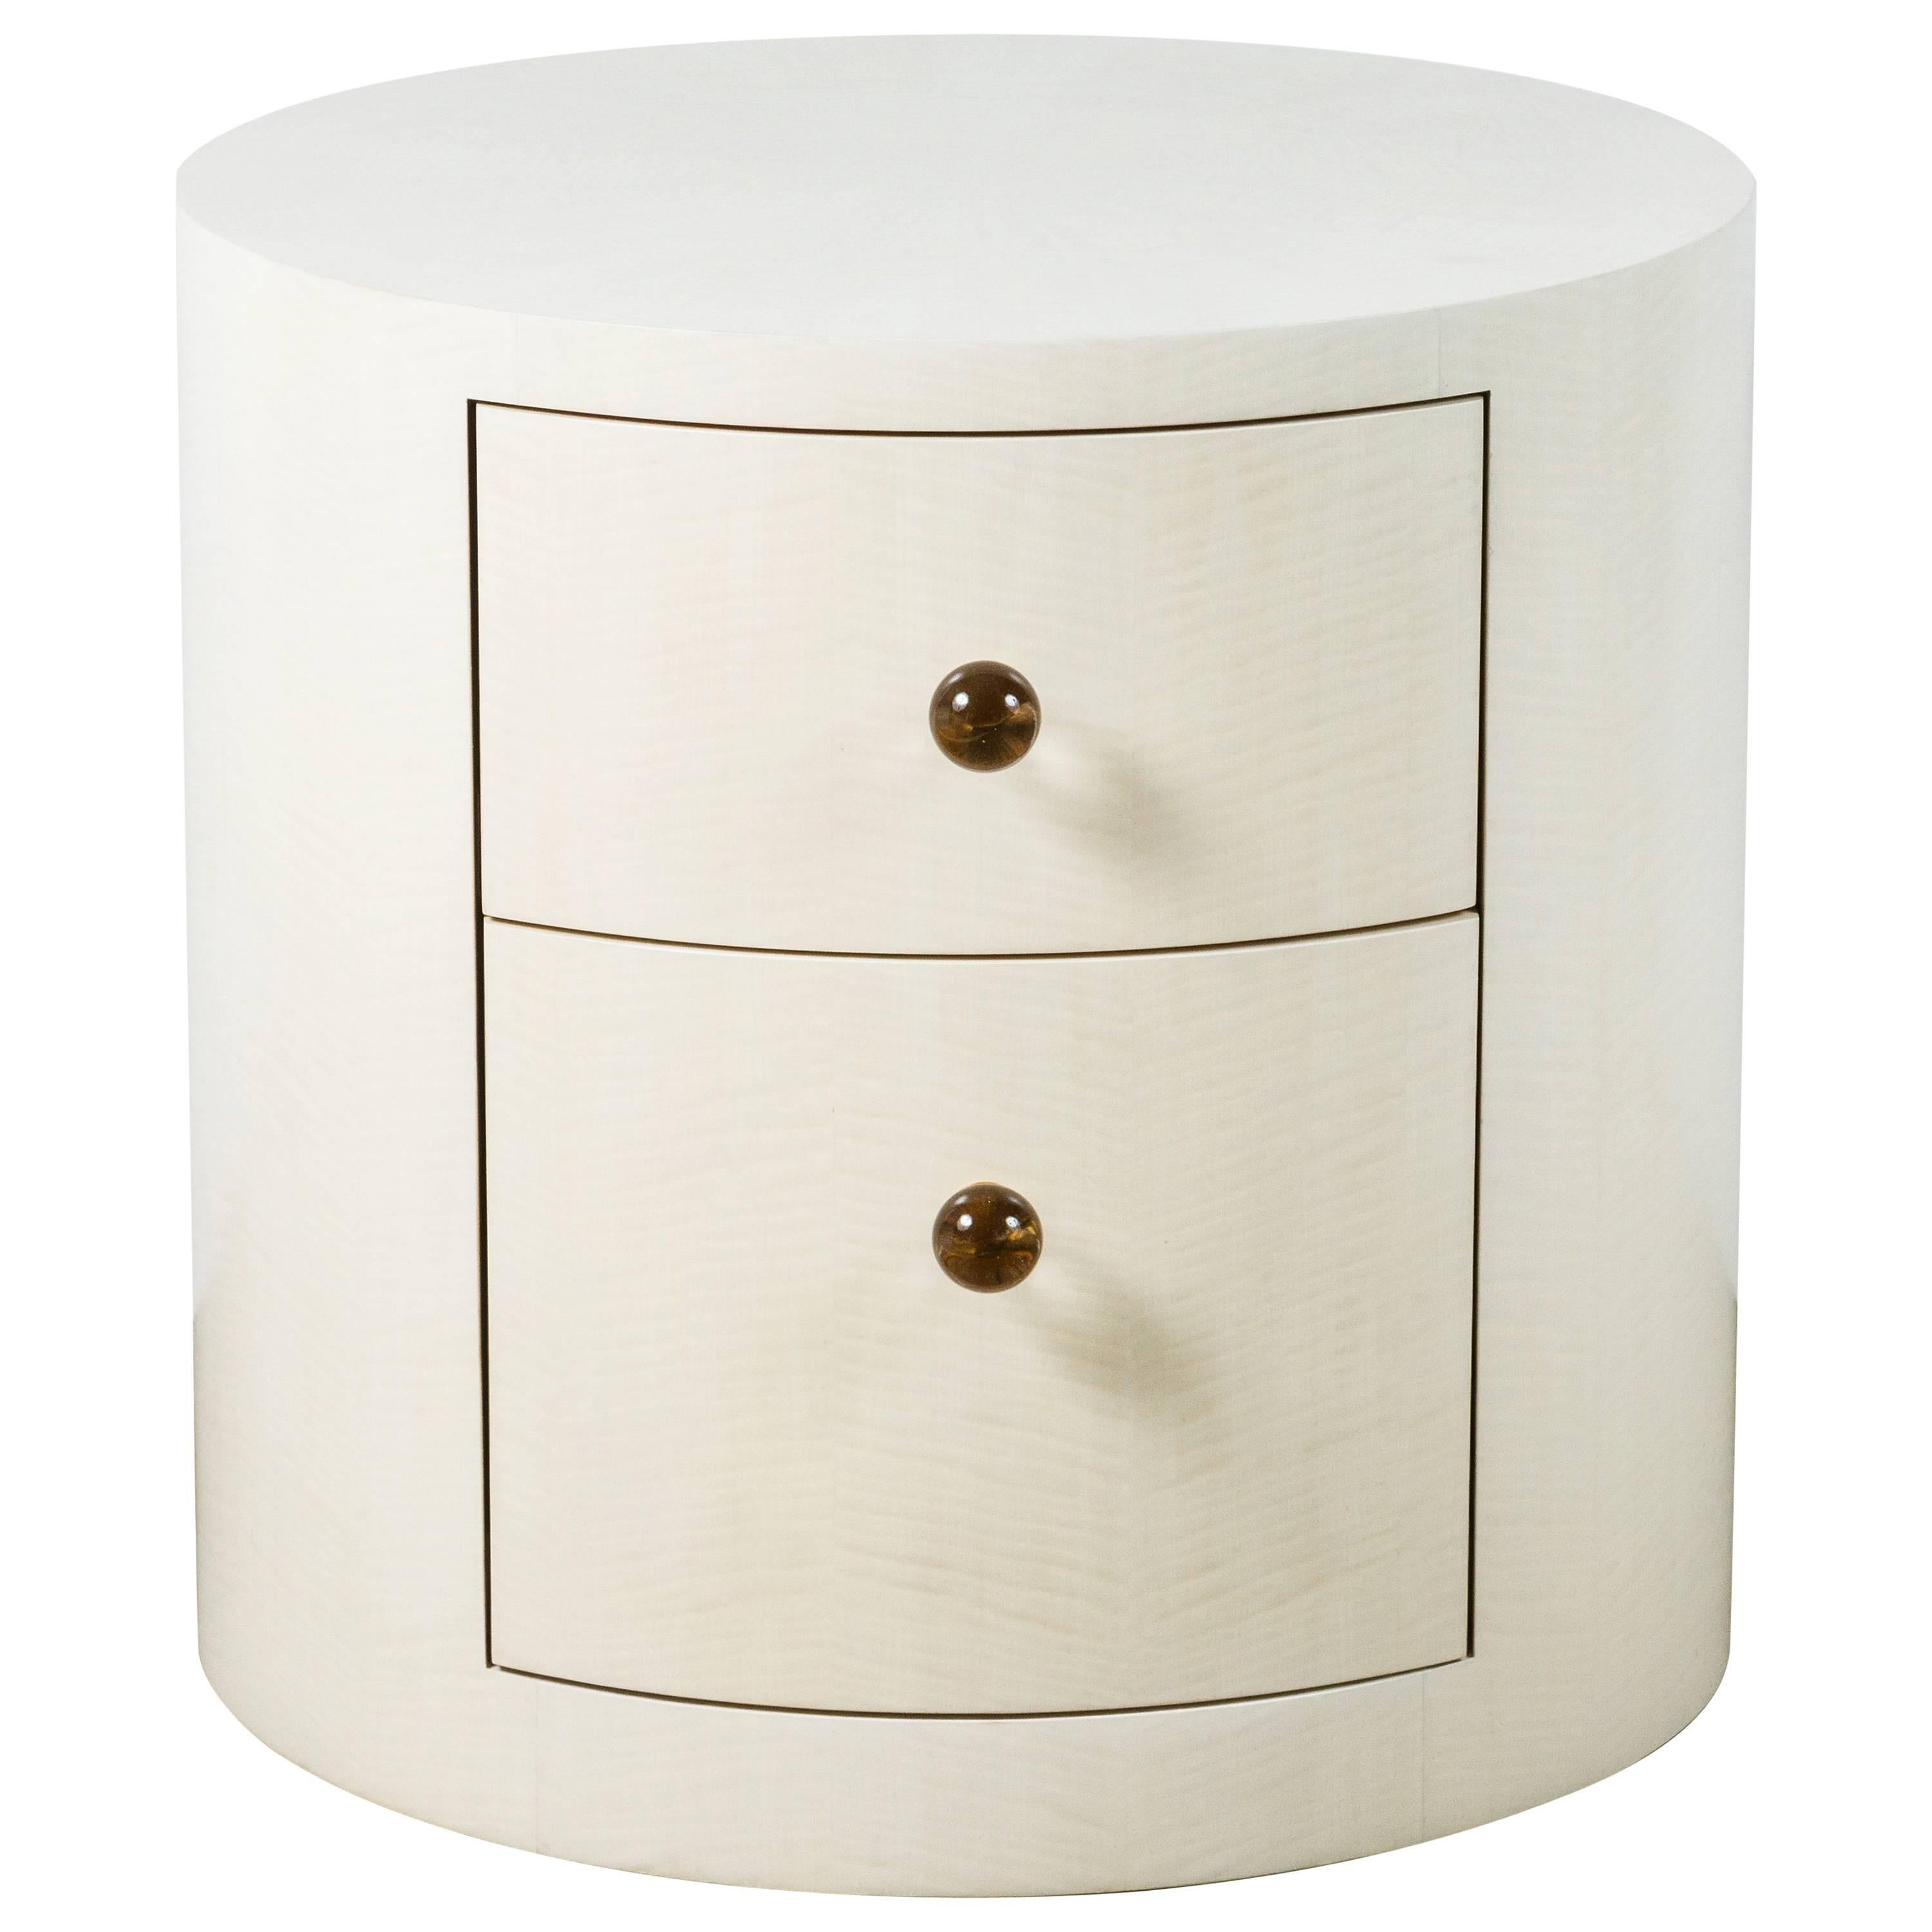 Italian-Inspired 1970s Style Round Nightstand For Sale